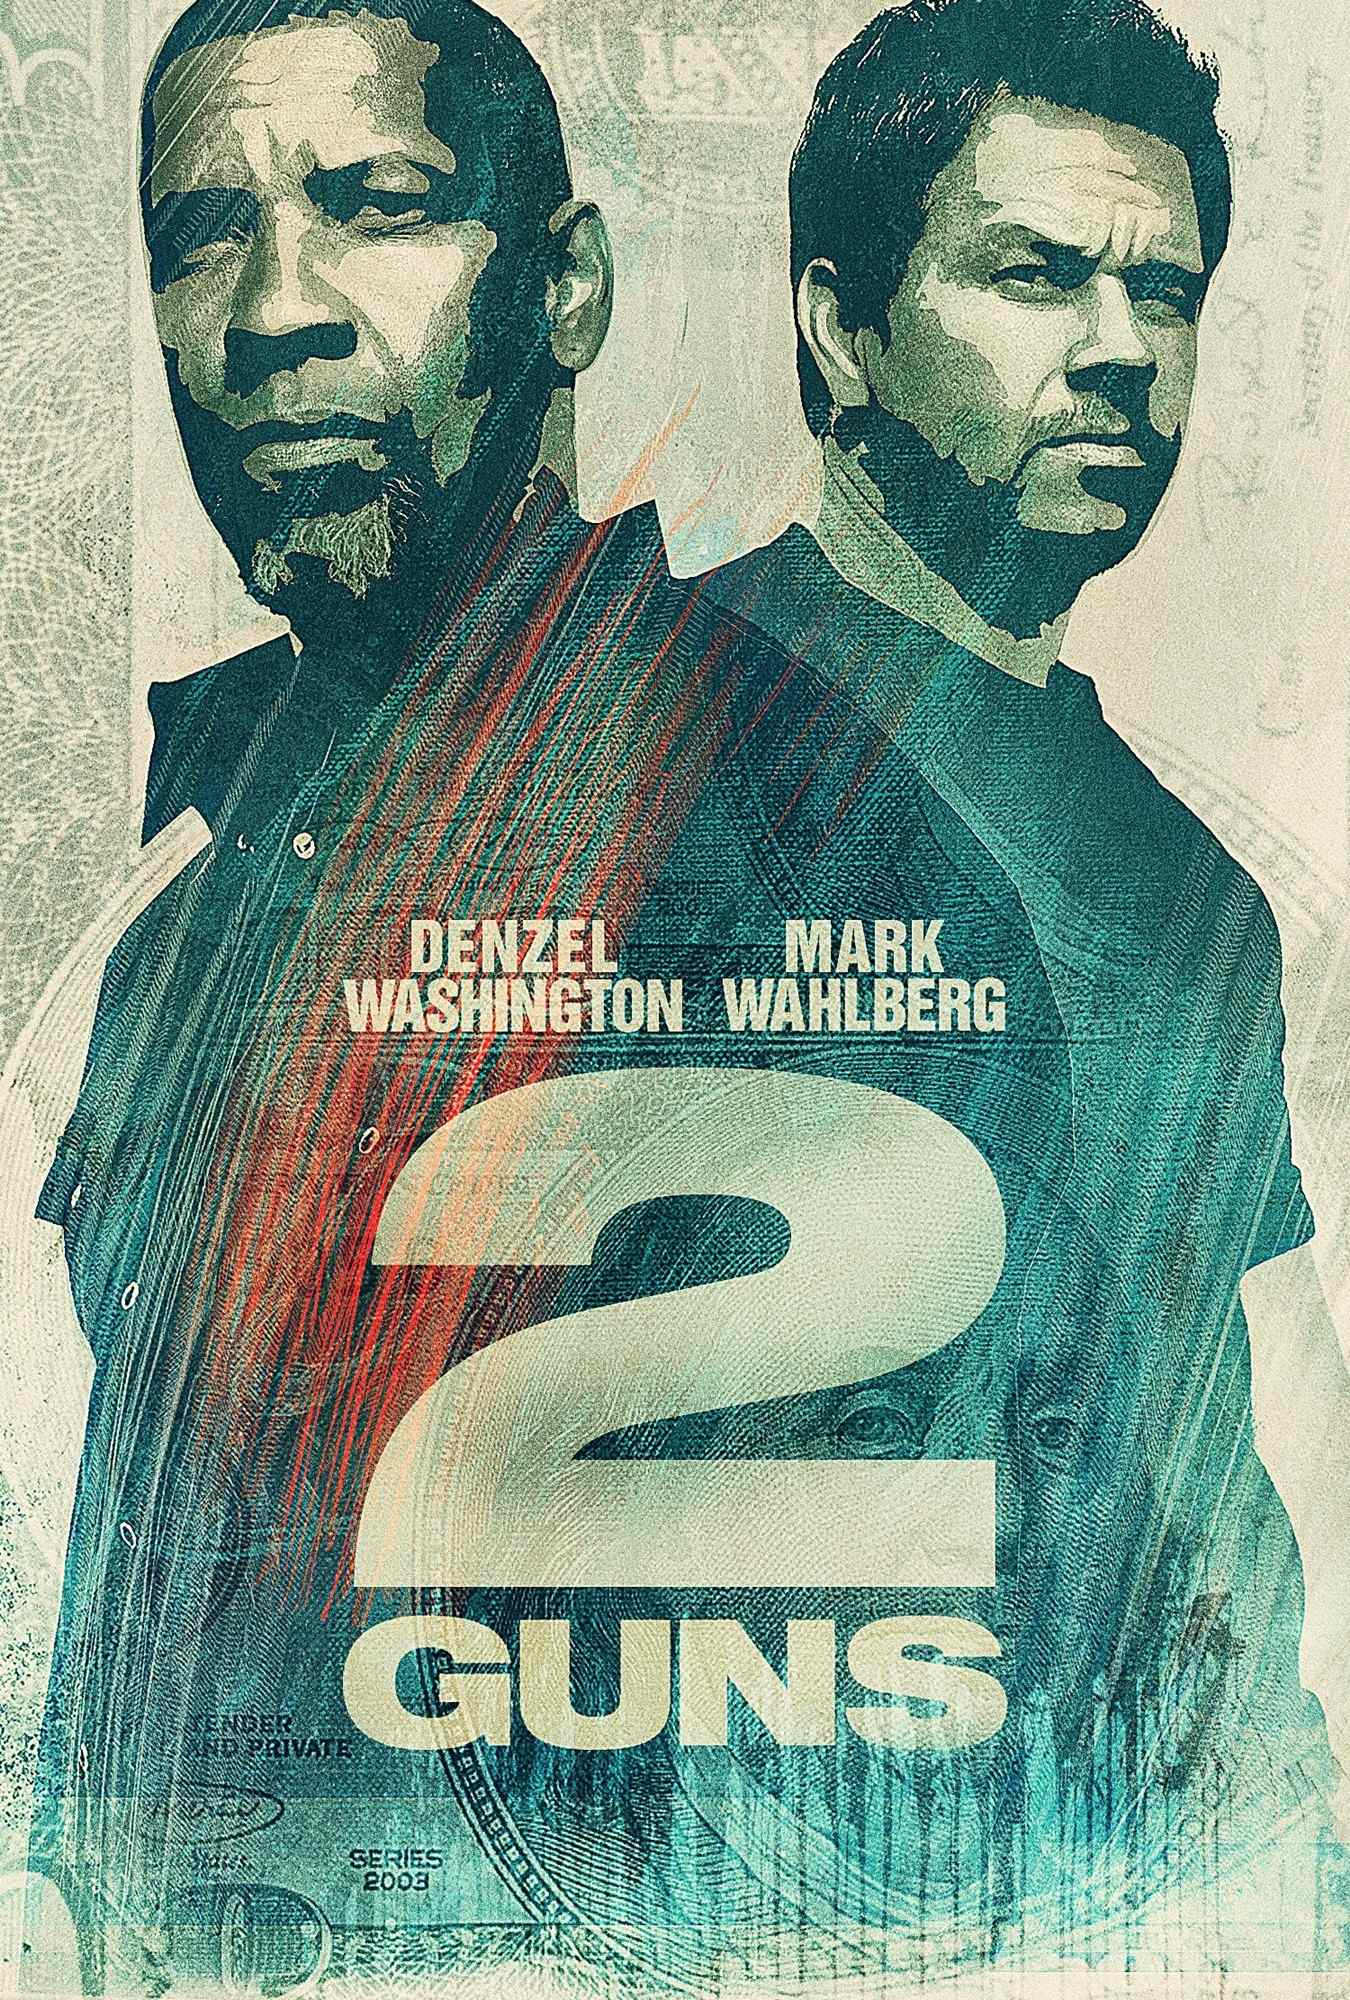 Poster of Universal Pictures' 2 Guns (2013)